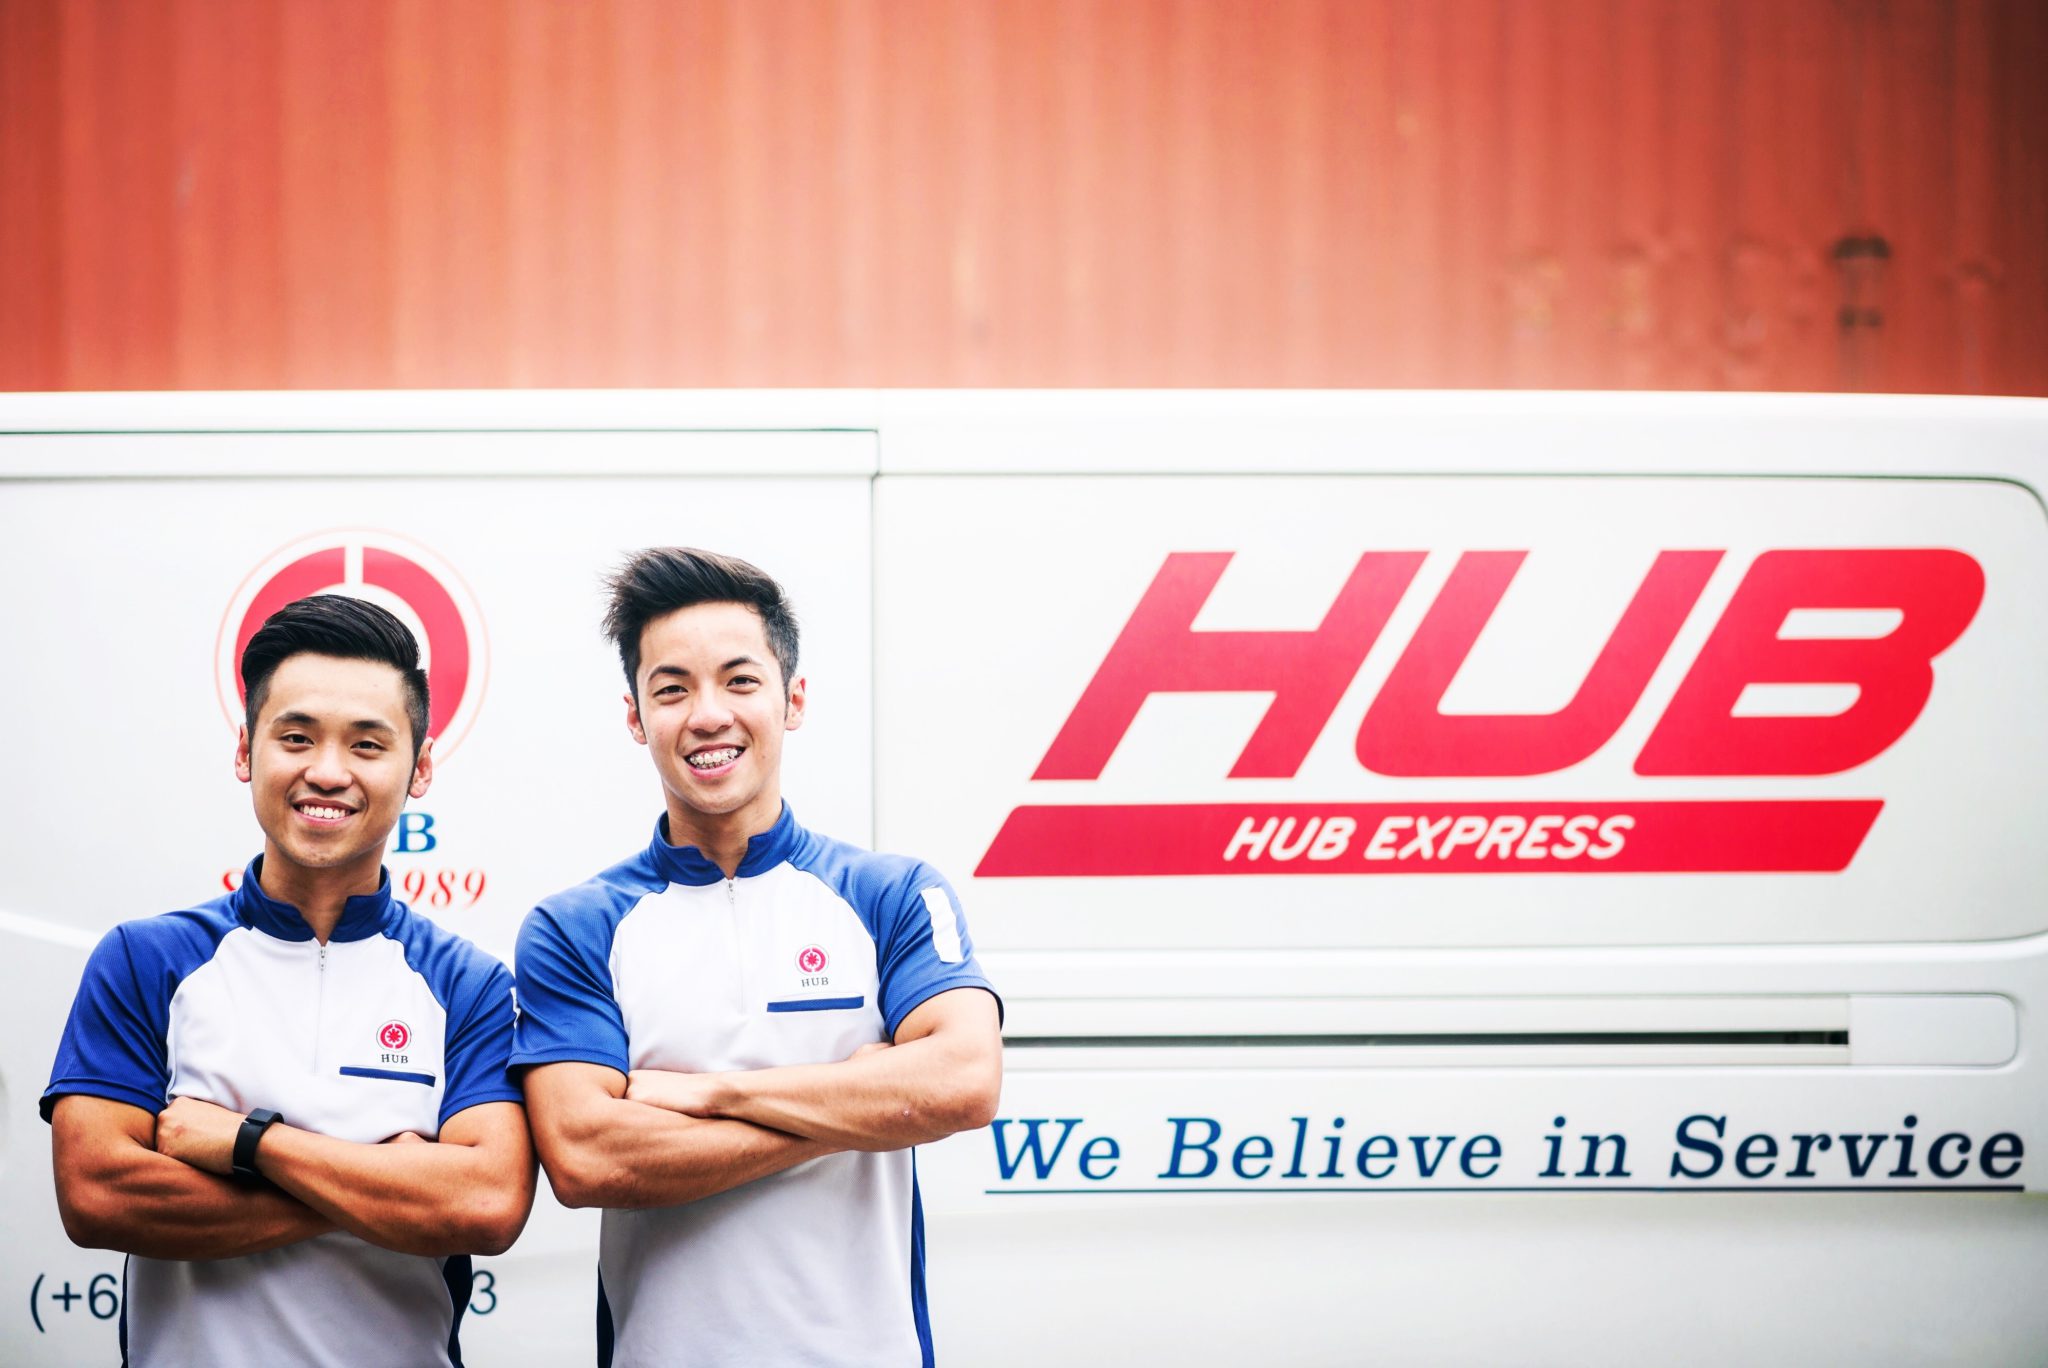 Alvin Ea (left) and his younger brother, Andy Ea, when they launched van courier delivery company Hub Express in 2015. Photo courtesy to Alvin Ea.